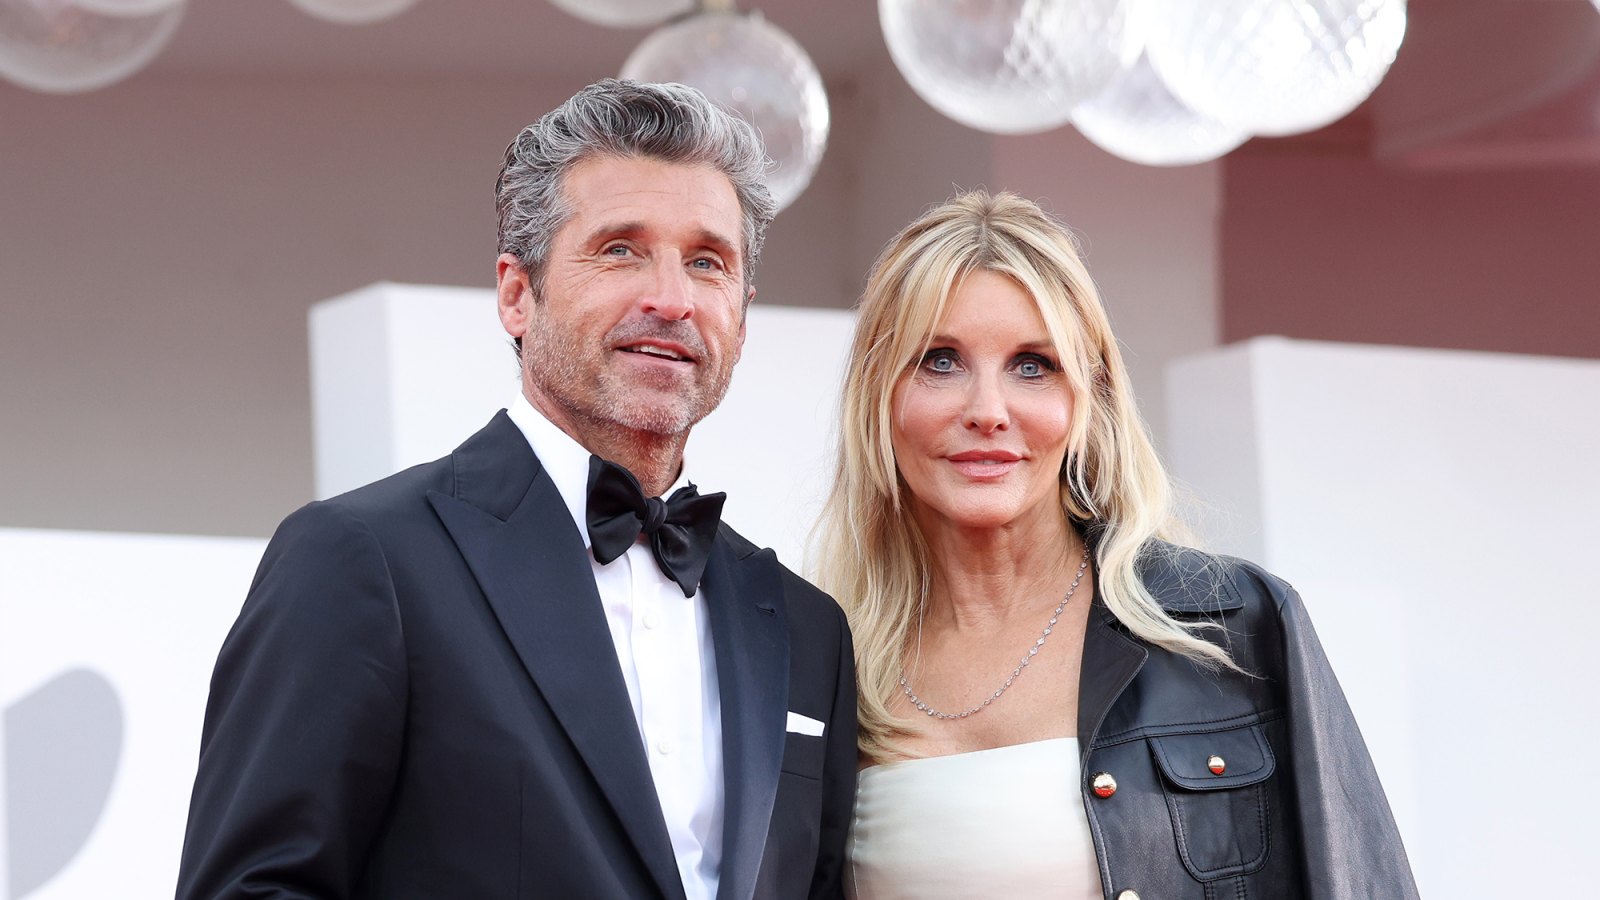 Patrick Dempsey and Wife Jillian’s Relationship Timeline: From 1st Meeting to Where They Stand Now